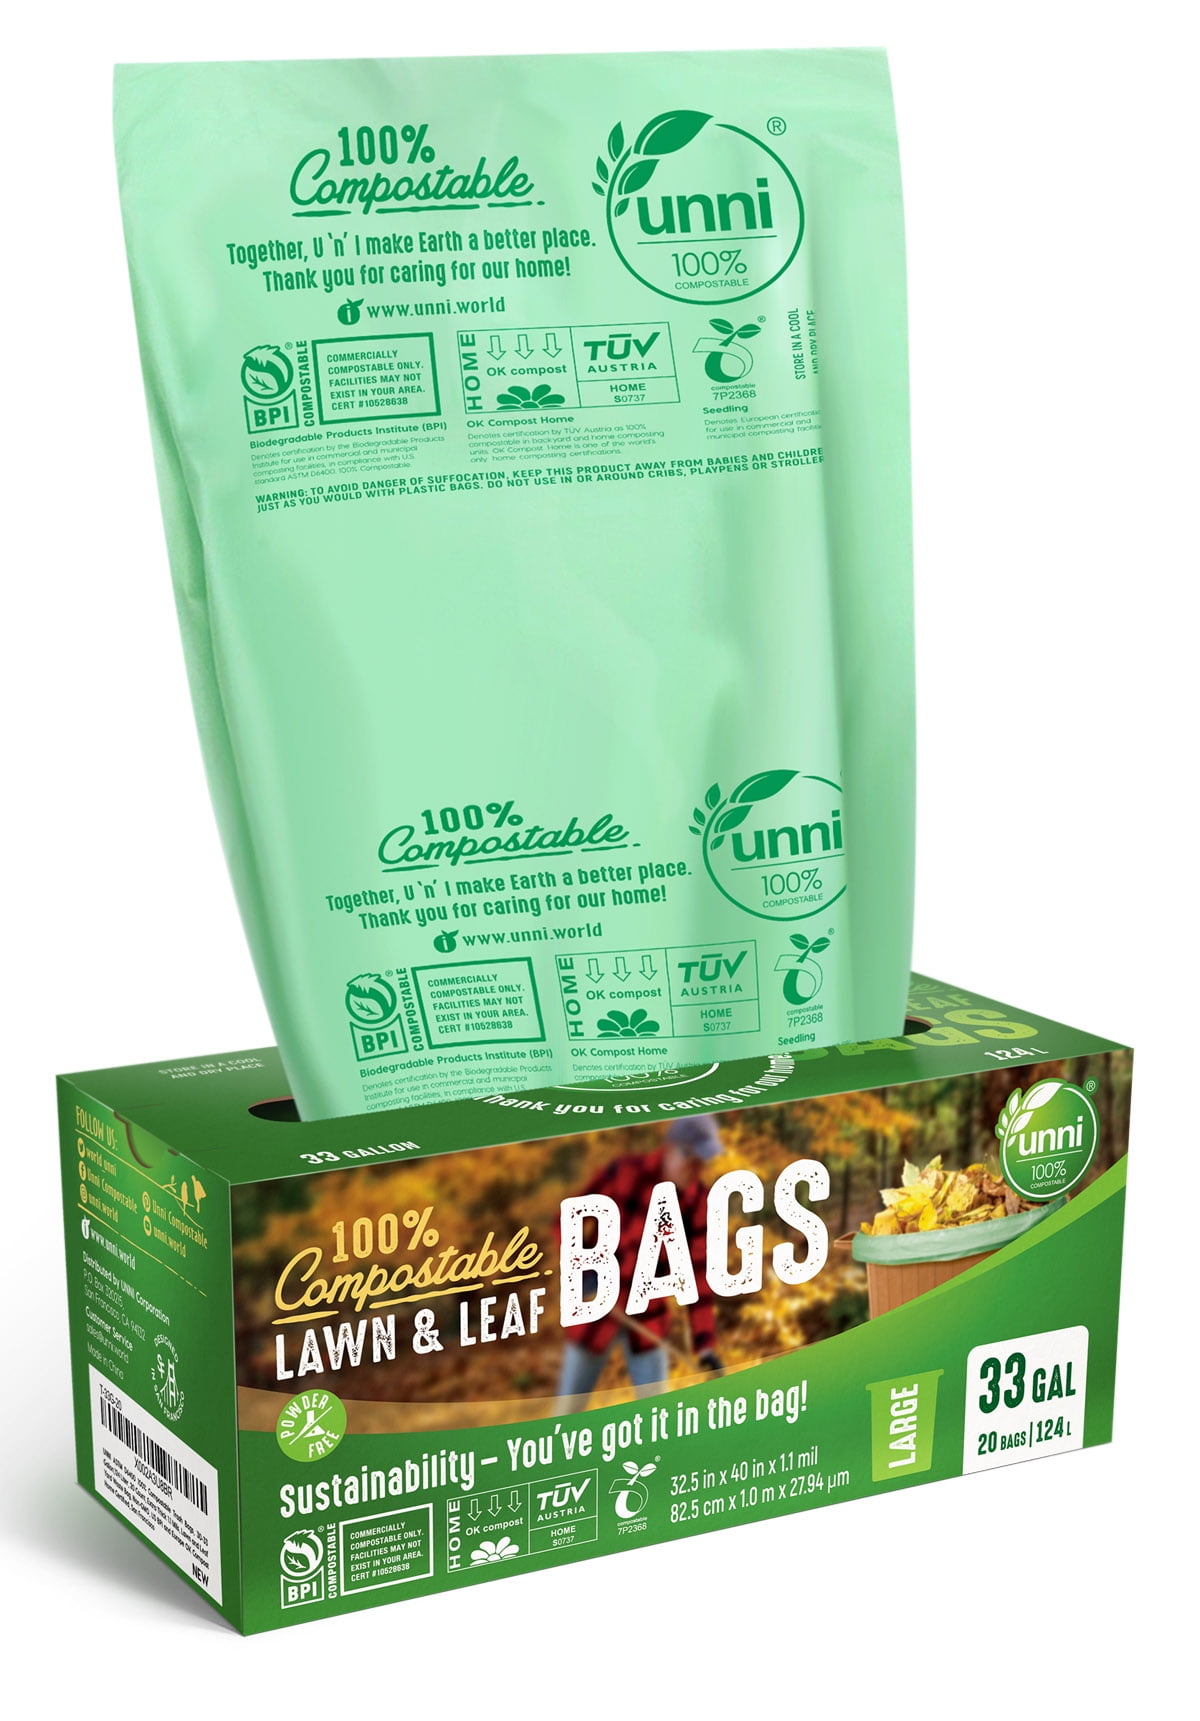 Biodegradable & Compostable Portable Toilet Replacement Bags Bathroom Bag 25x23in 8 Gallon Bags 30pcs/Roll Elite Trash Bags Garbage Bags Waste Bags Toiletry Bags 2 Rolls